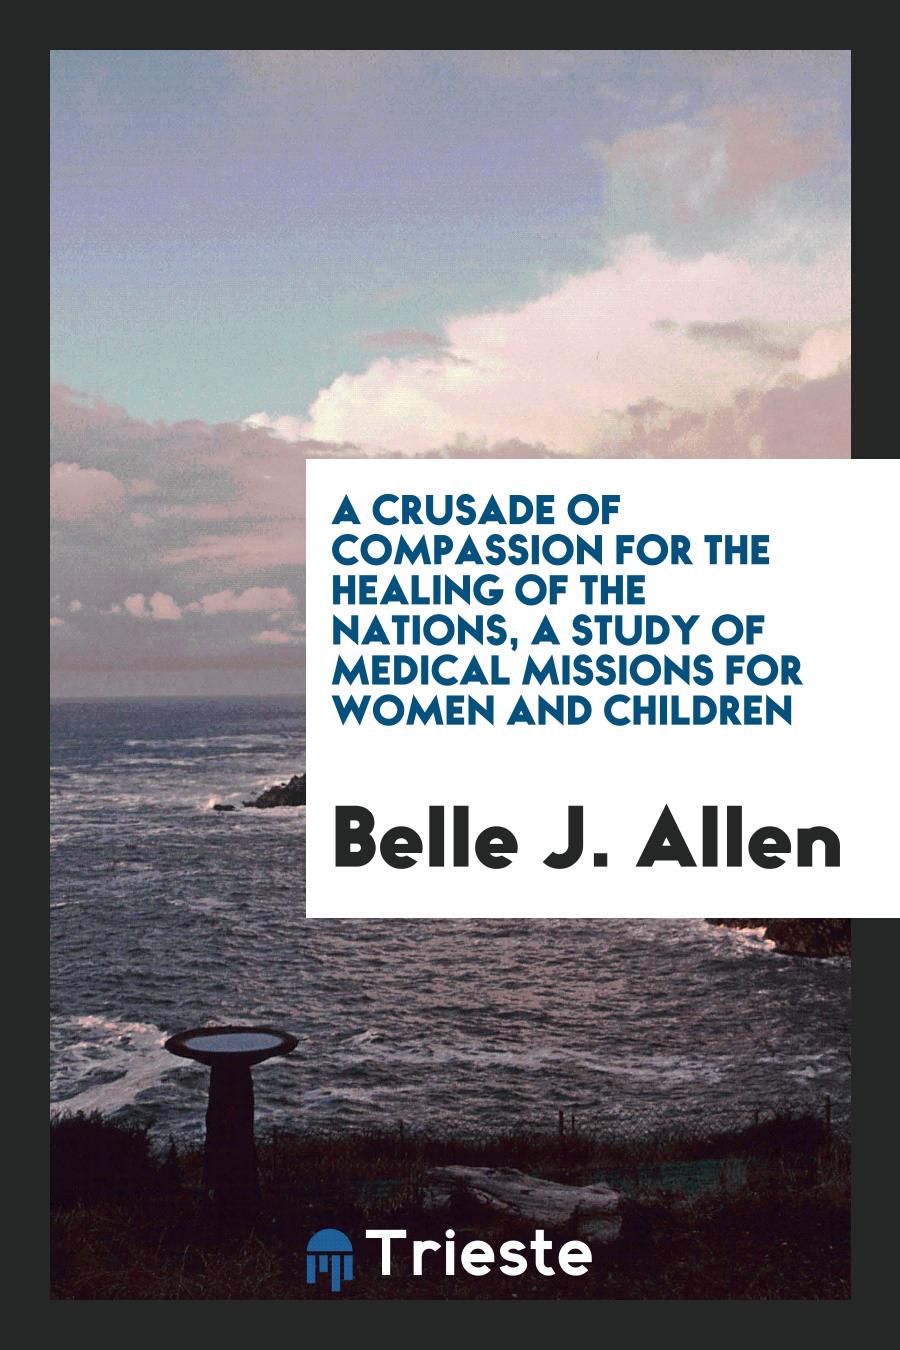 A Crusade of Compassion for the Healing of the Nations, a Study of Medical Missions for Women and Children